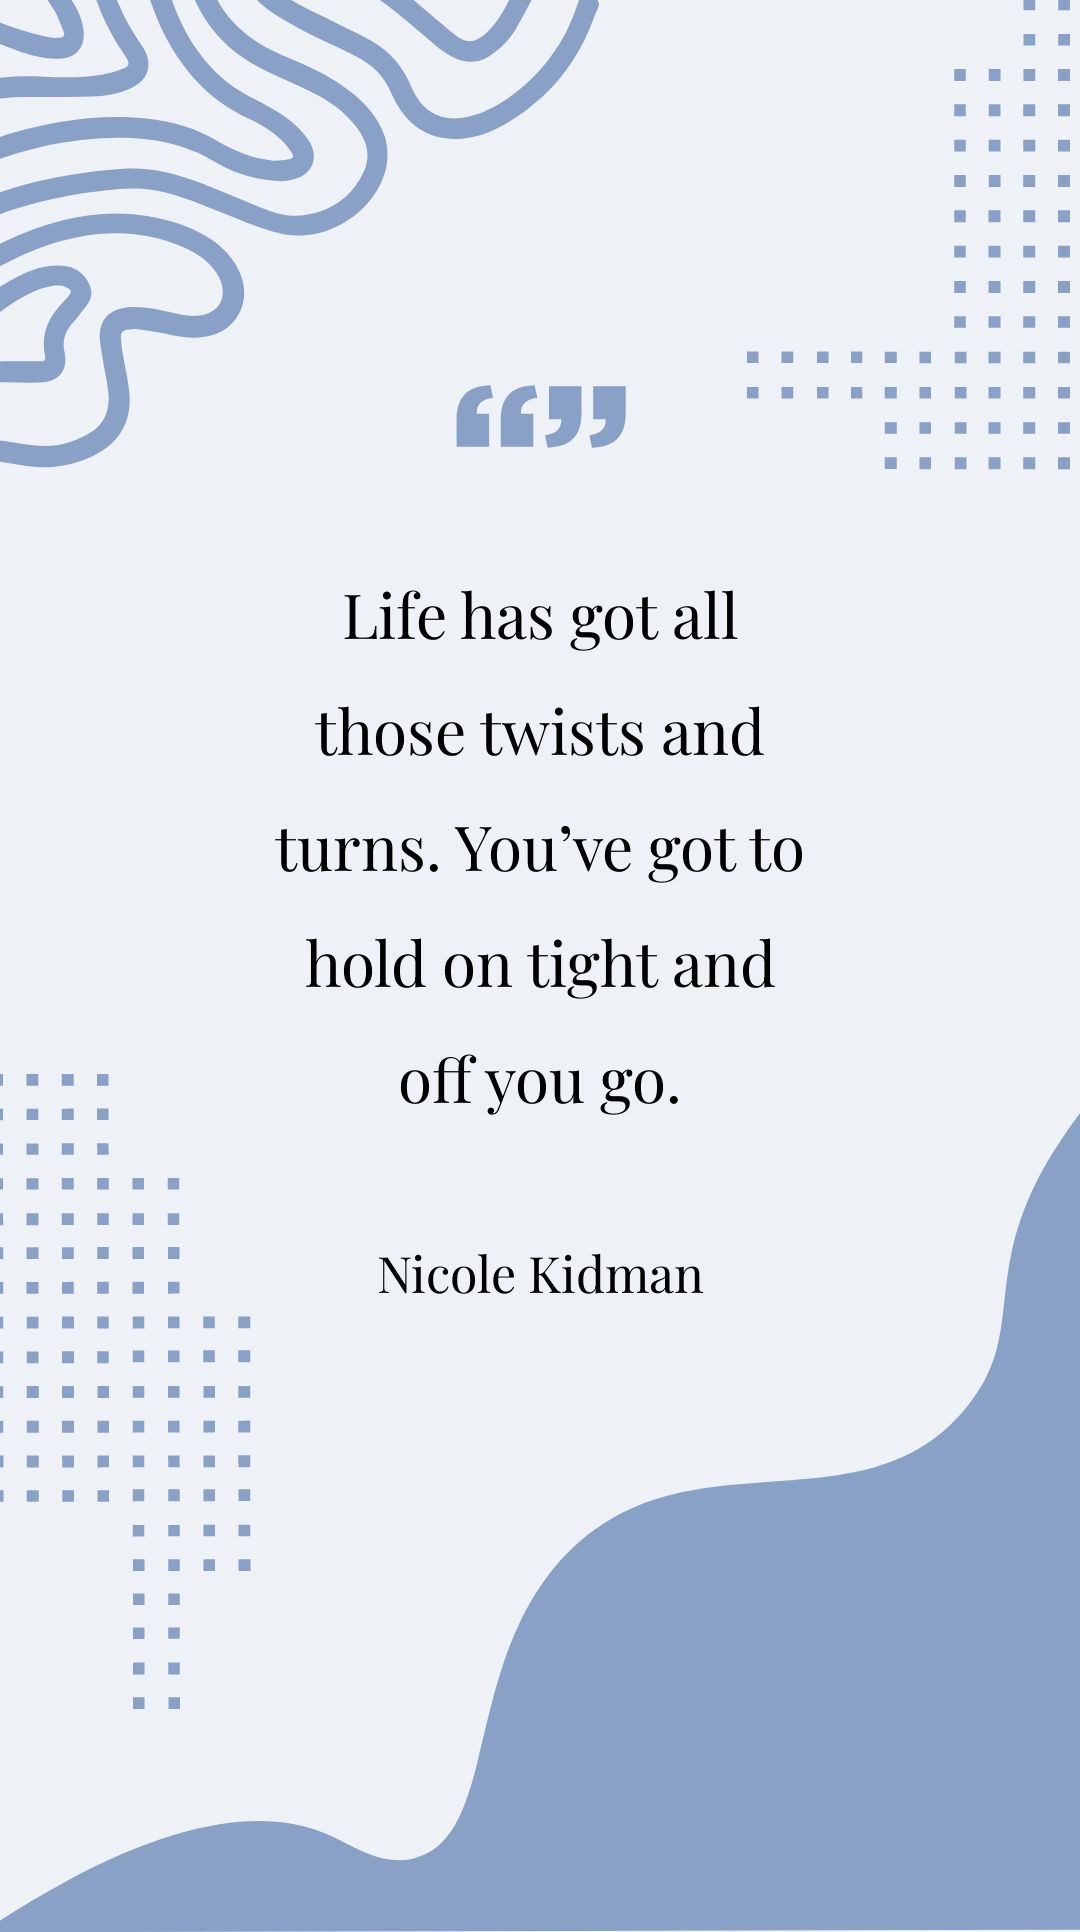 Nicole Kidman - Life has got all those twists and turns. You’ve got to hold on tight and off you go.